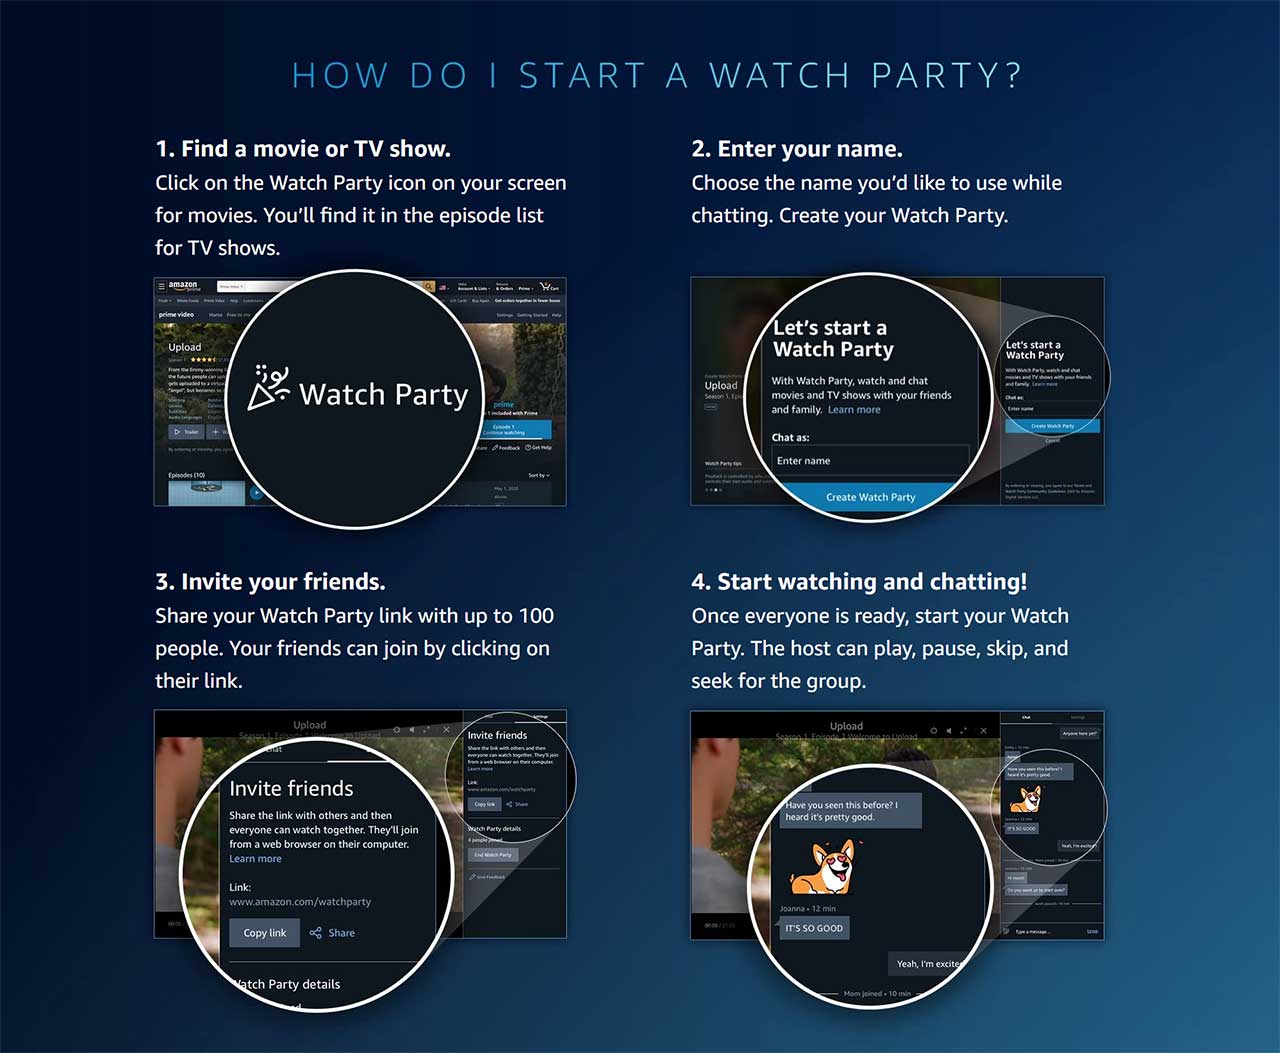 Prime Video Watch Party Comes to India: How to Watch Your